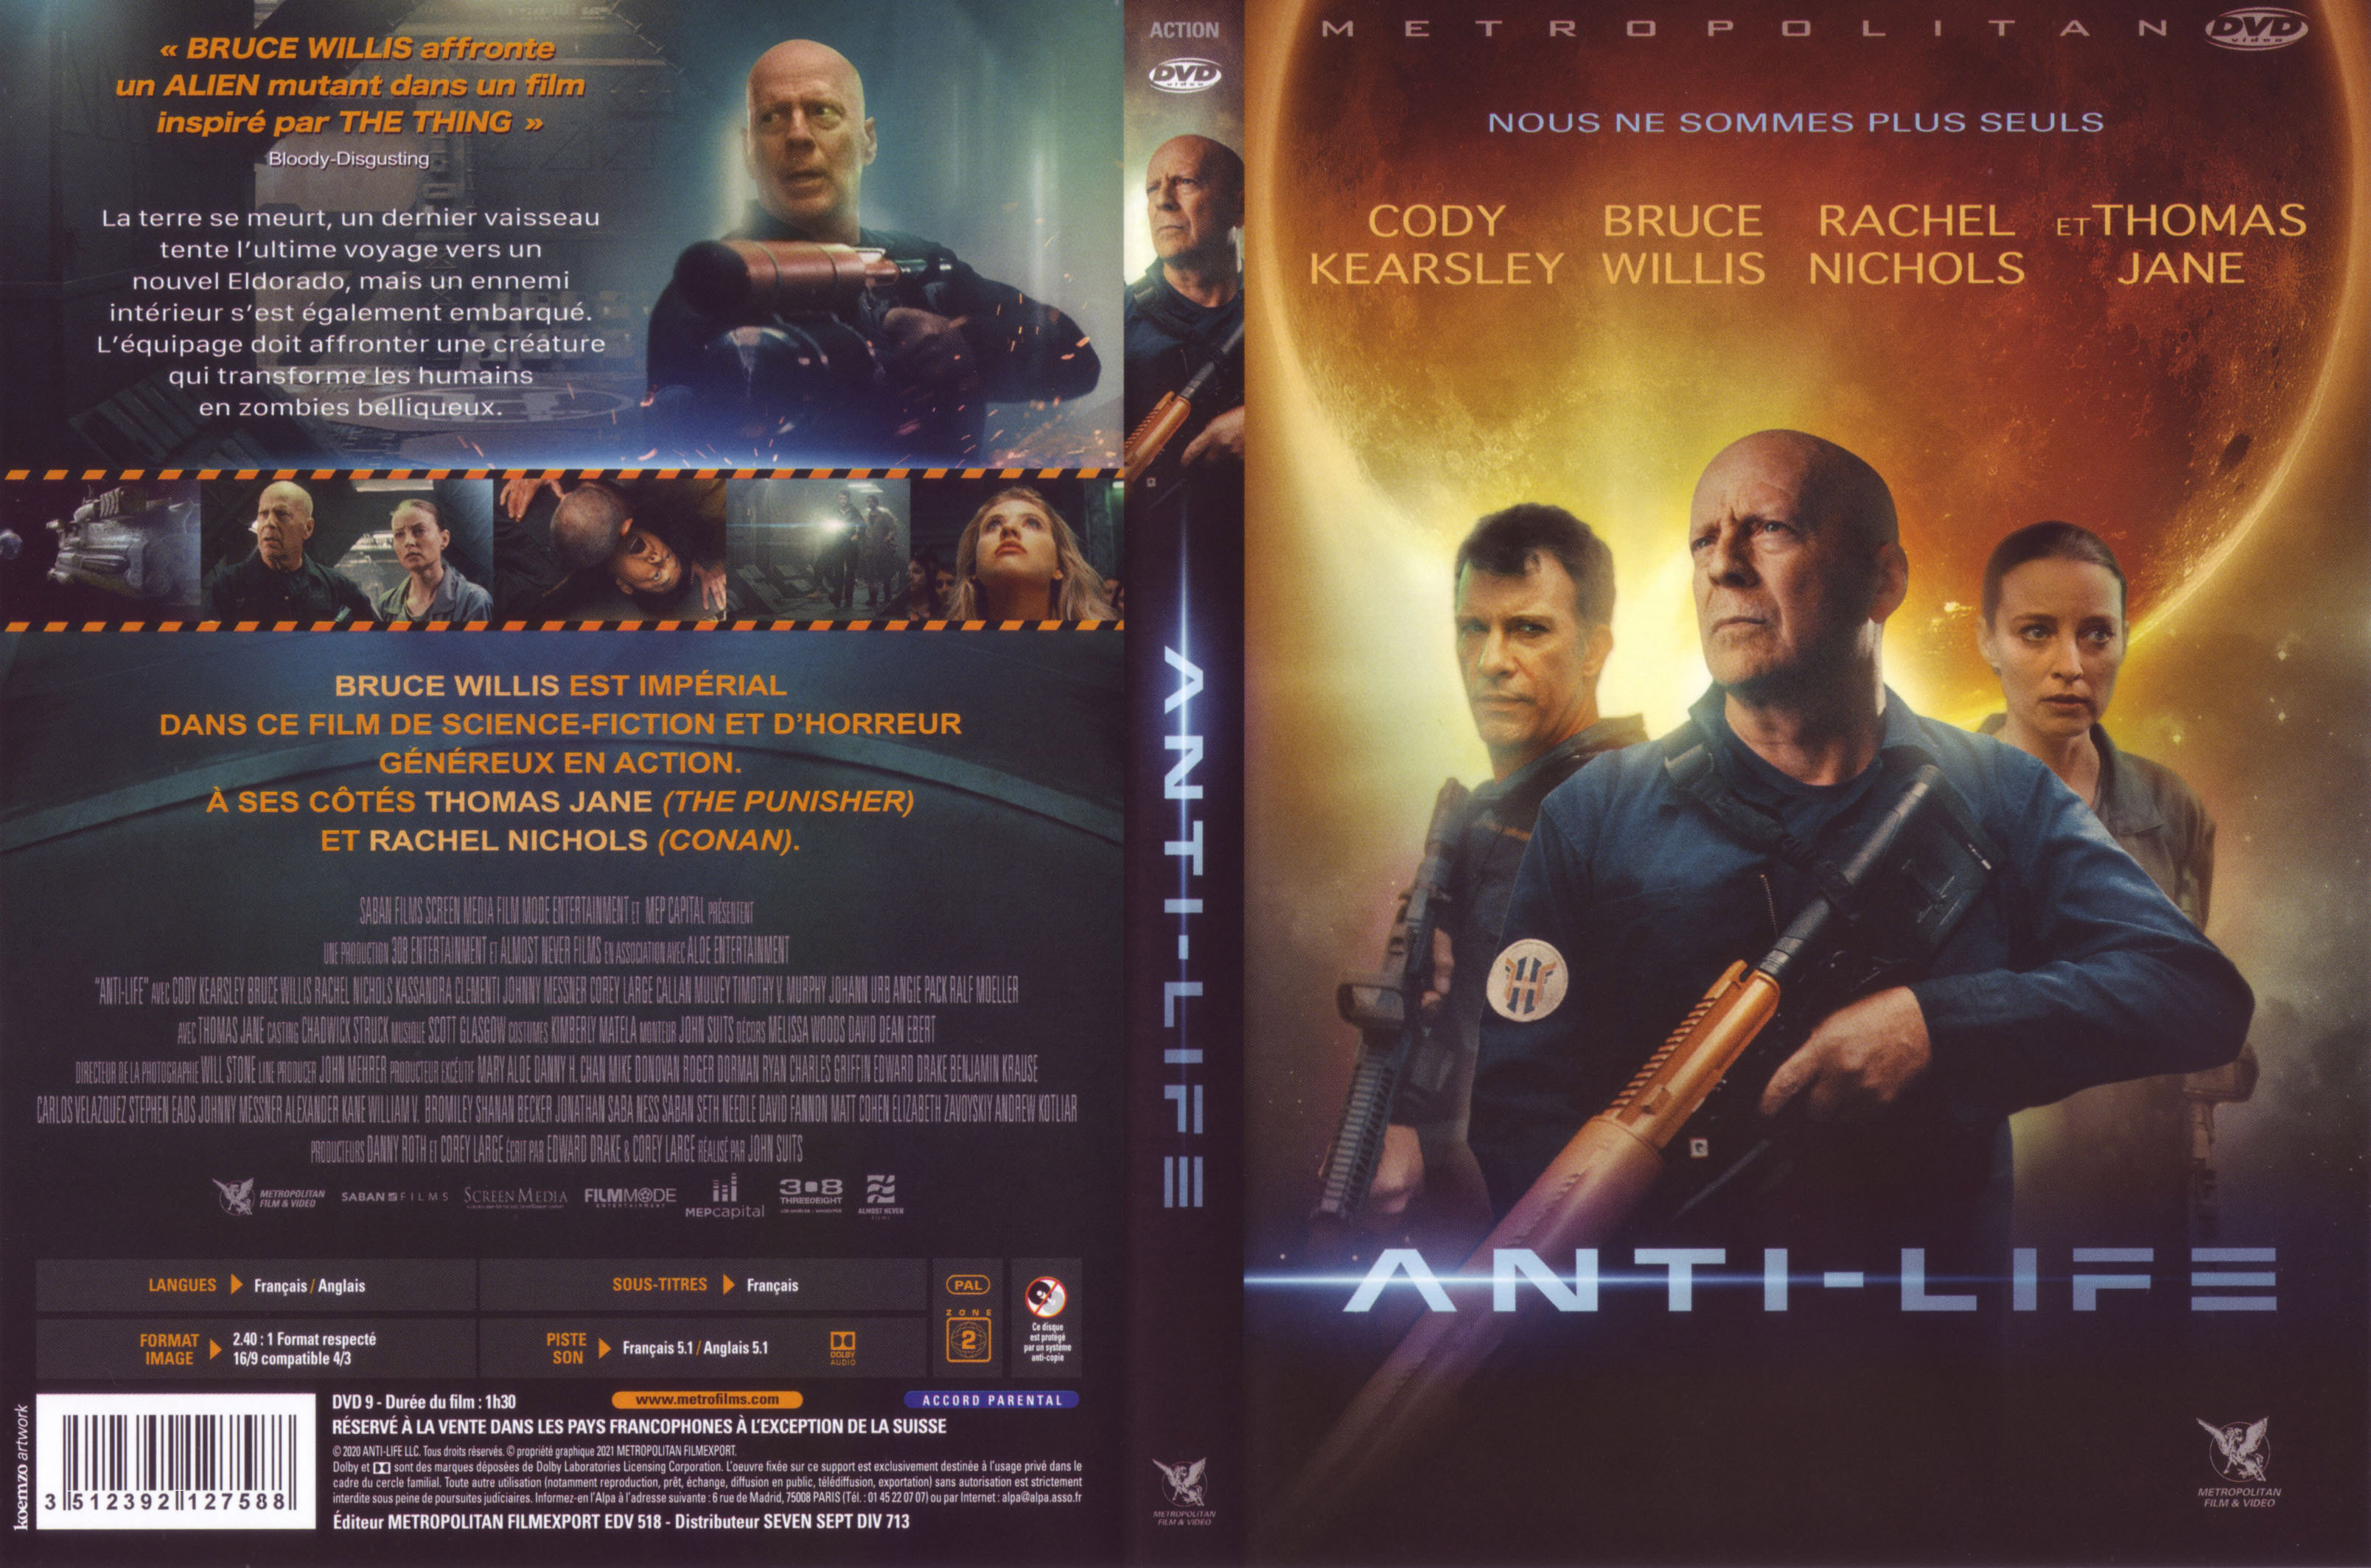 Jaquette DVD Anti-life